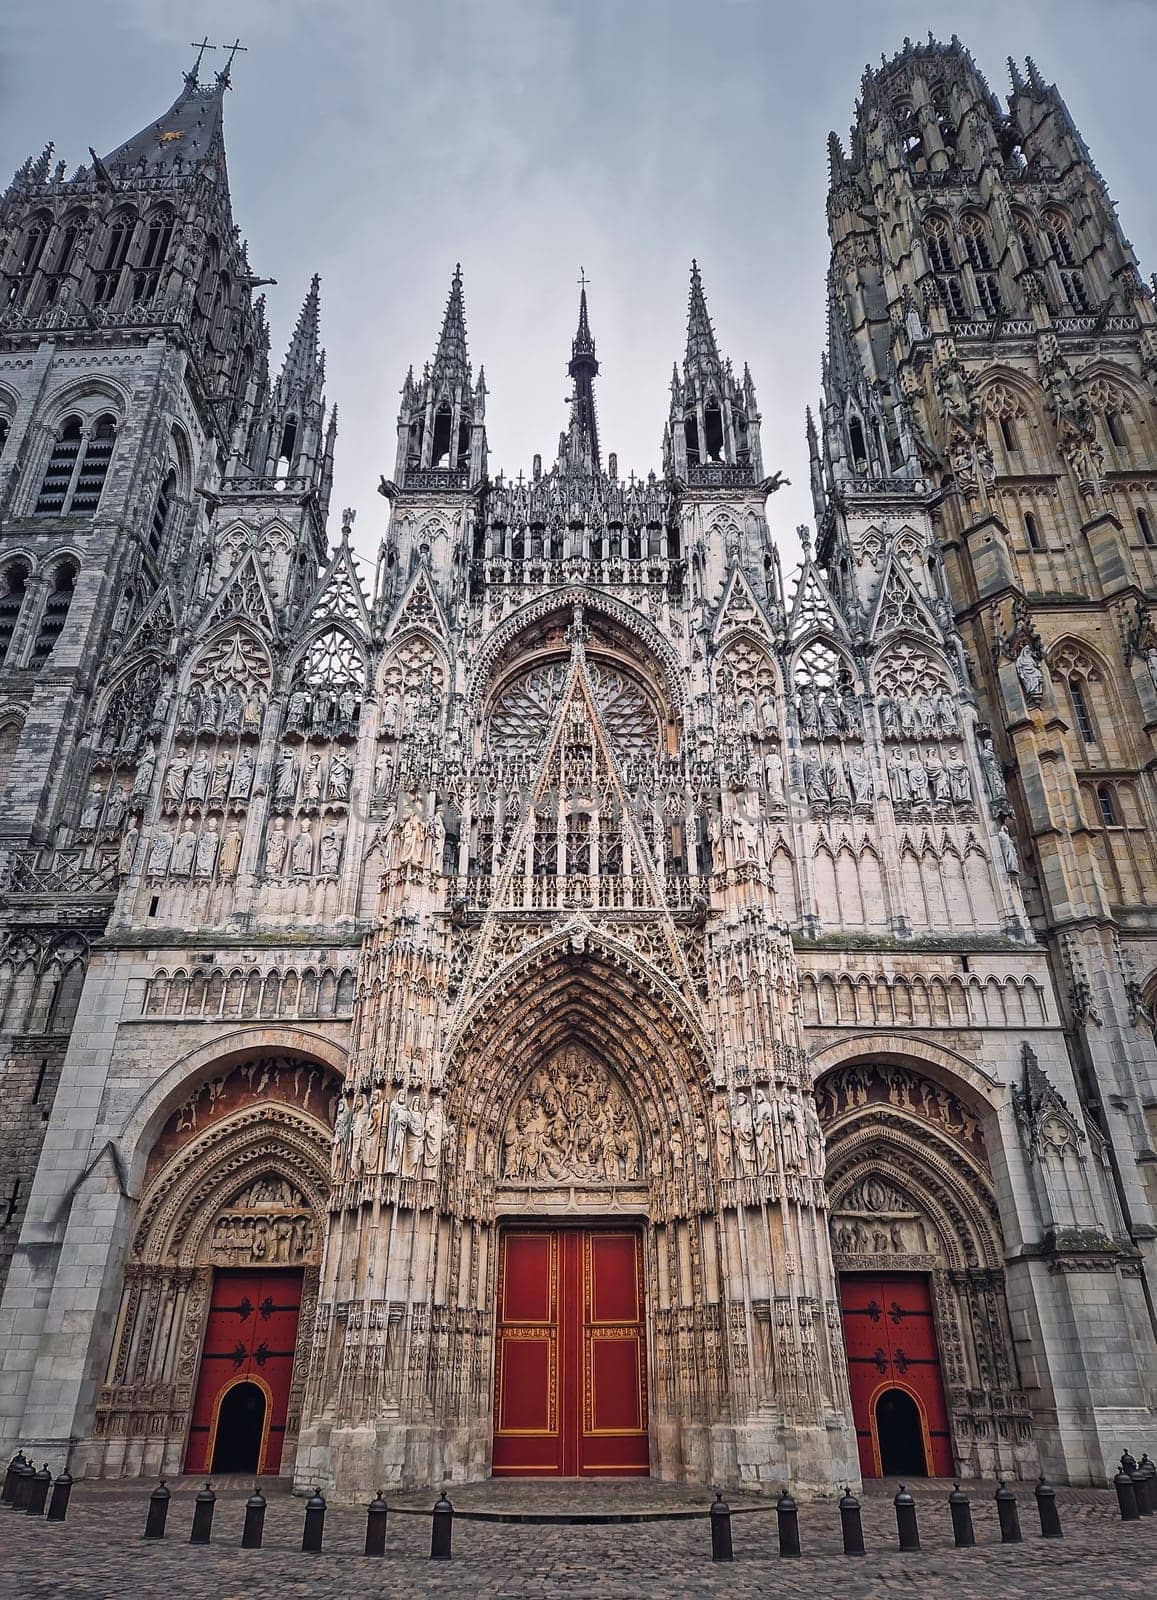 Outdoor facade view of Notre Dame de Rouen Cathedral in the Normandy, France. Architectural landmark featuring styles from Early Gothic to late Flamboyant and Renaissance architecture by psychoshadow